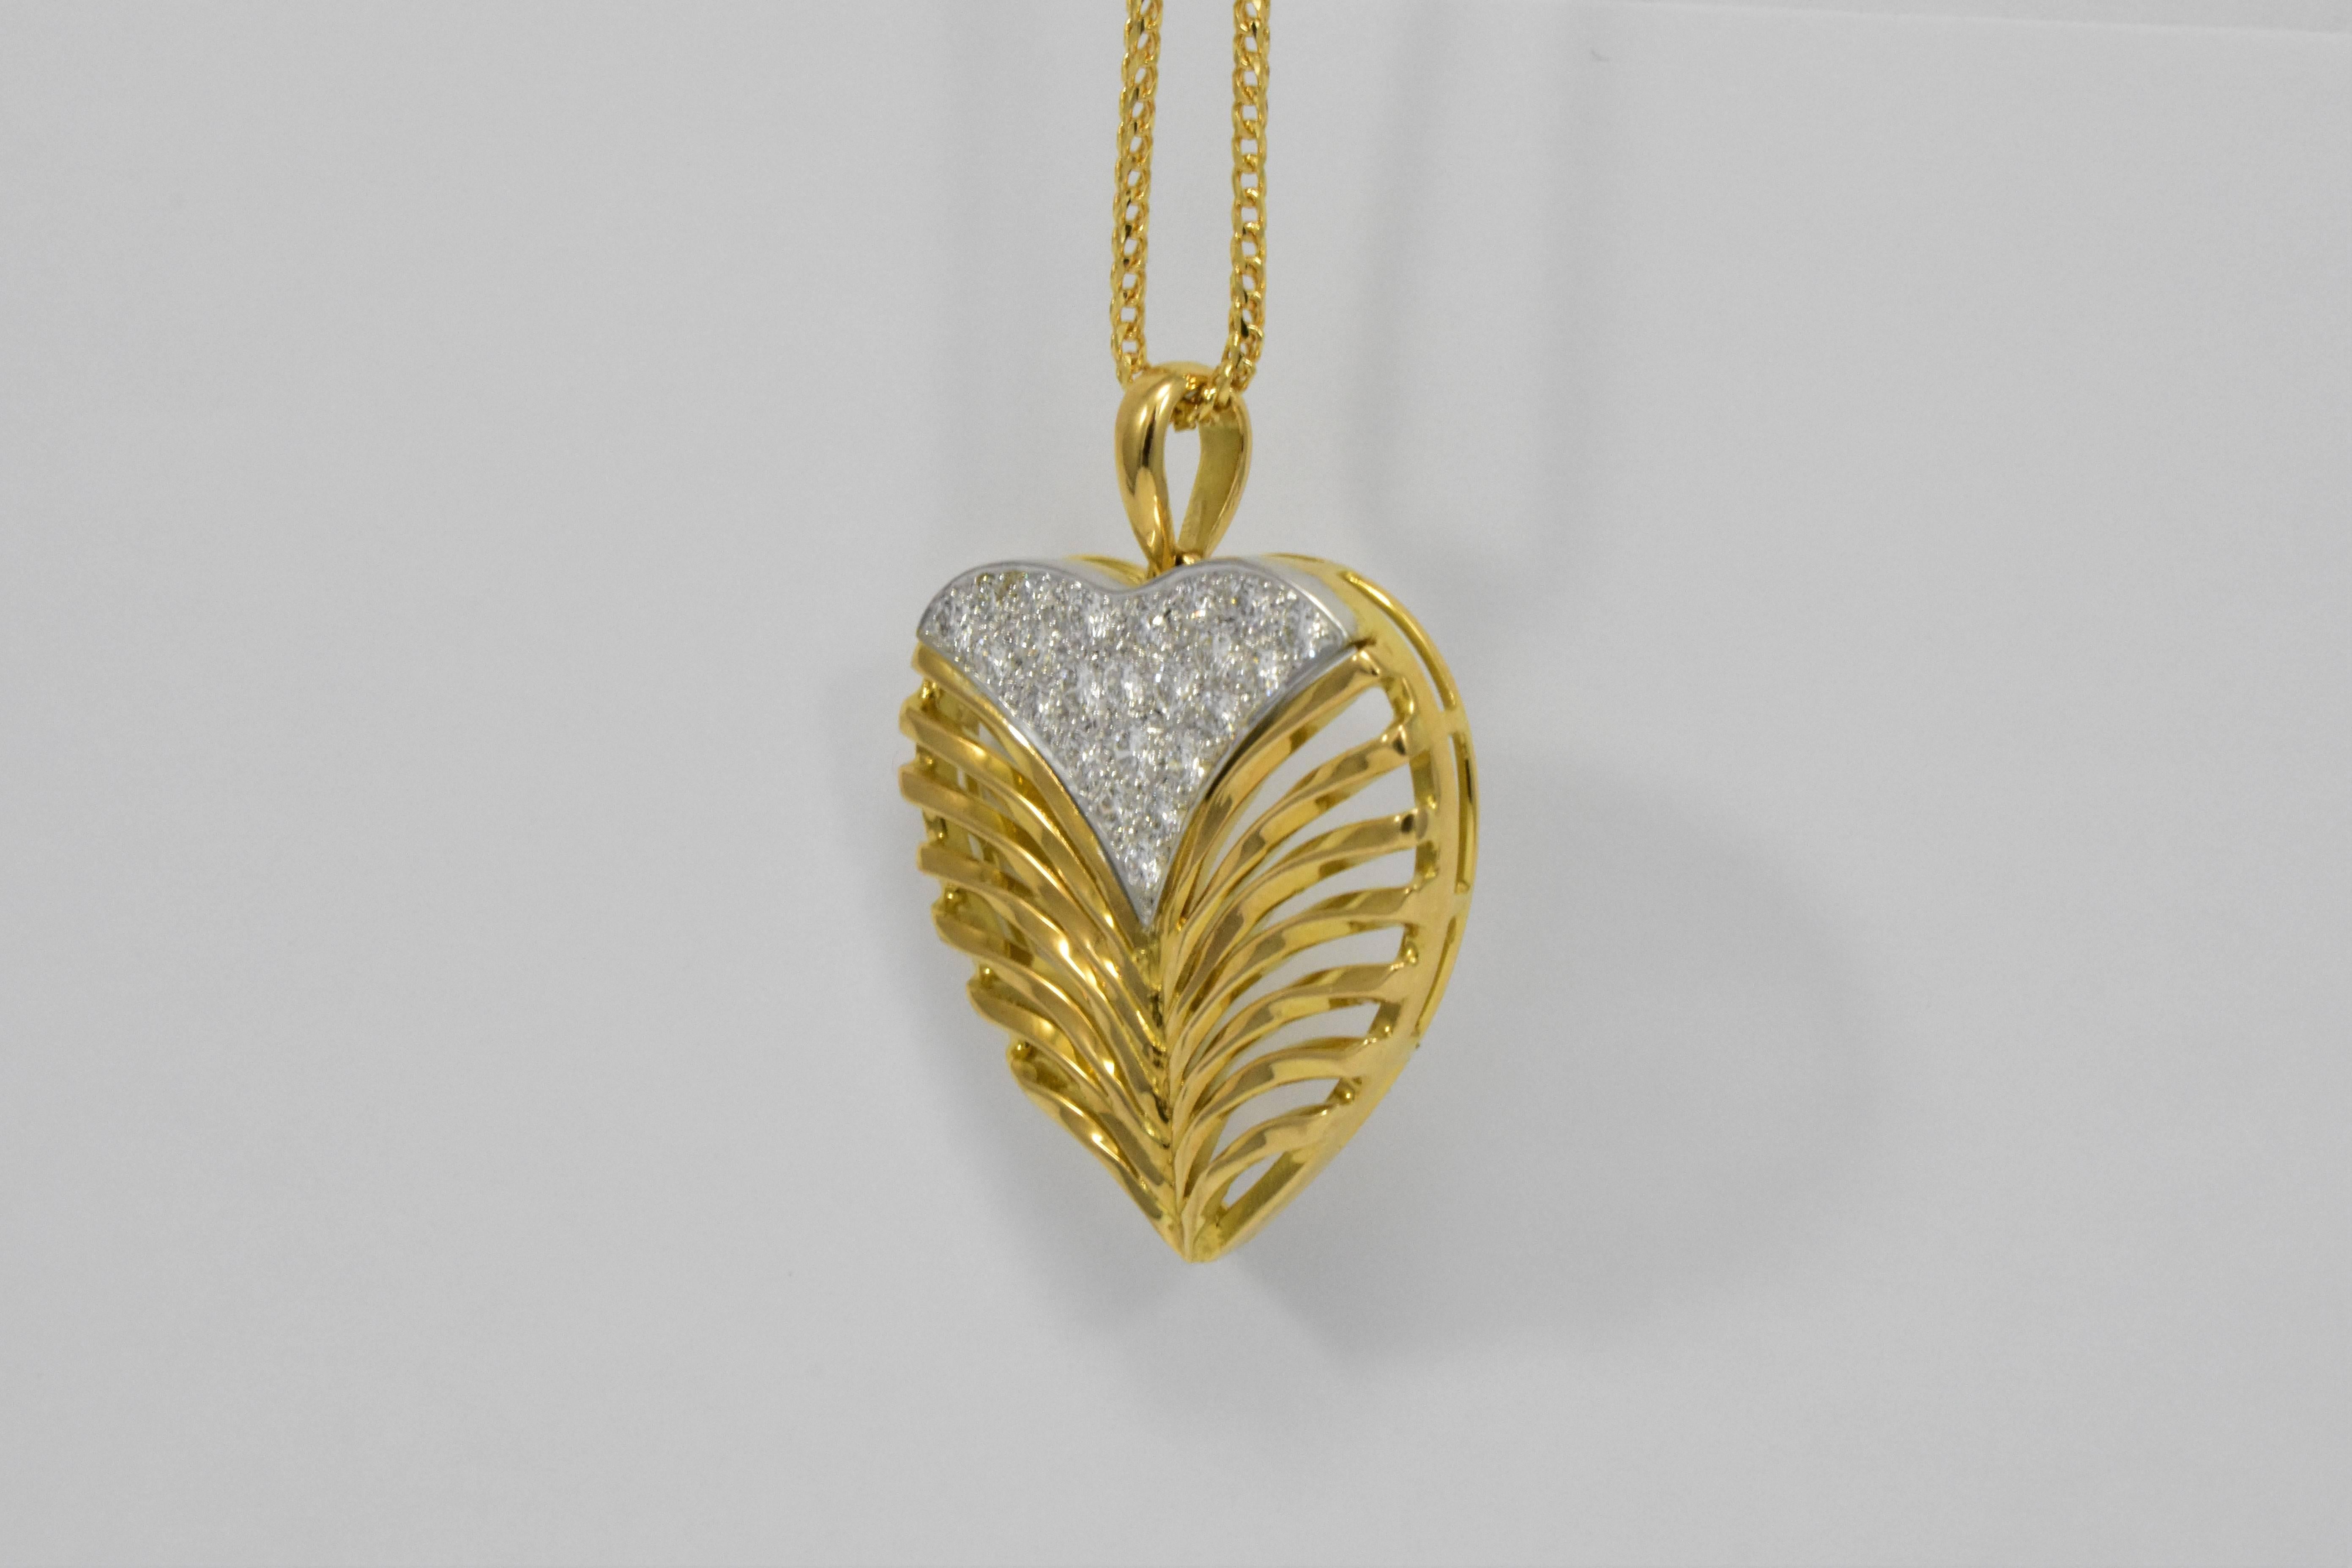 Daou Diamond, White & Yellow Gold Heart Pendant Necklace with Leaf Motif Detail For Sale 2